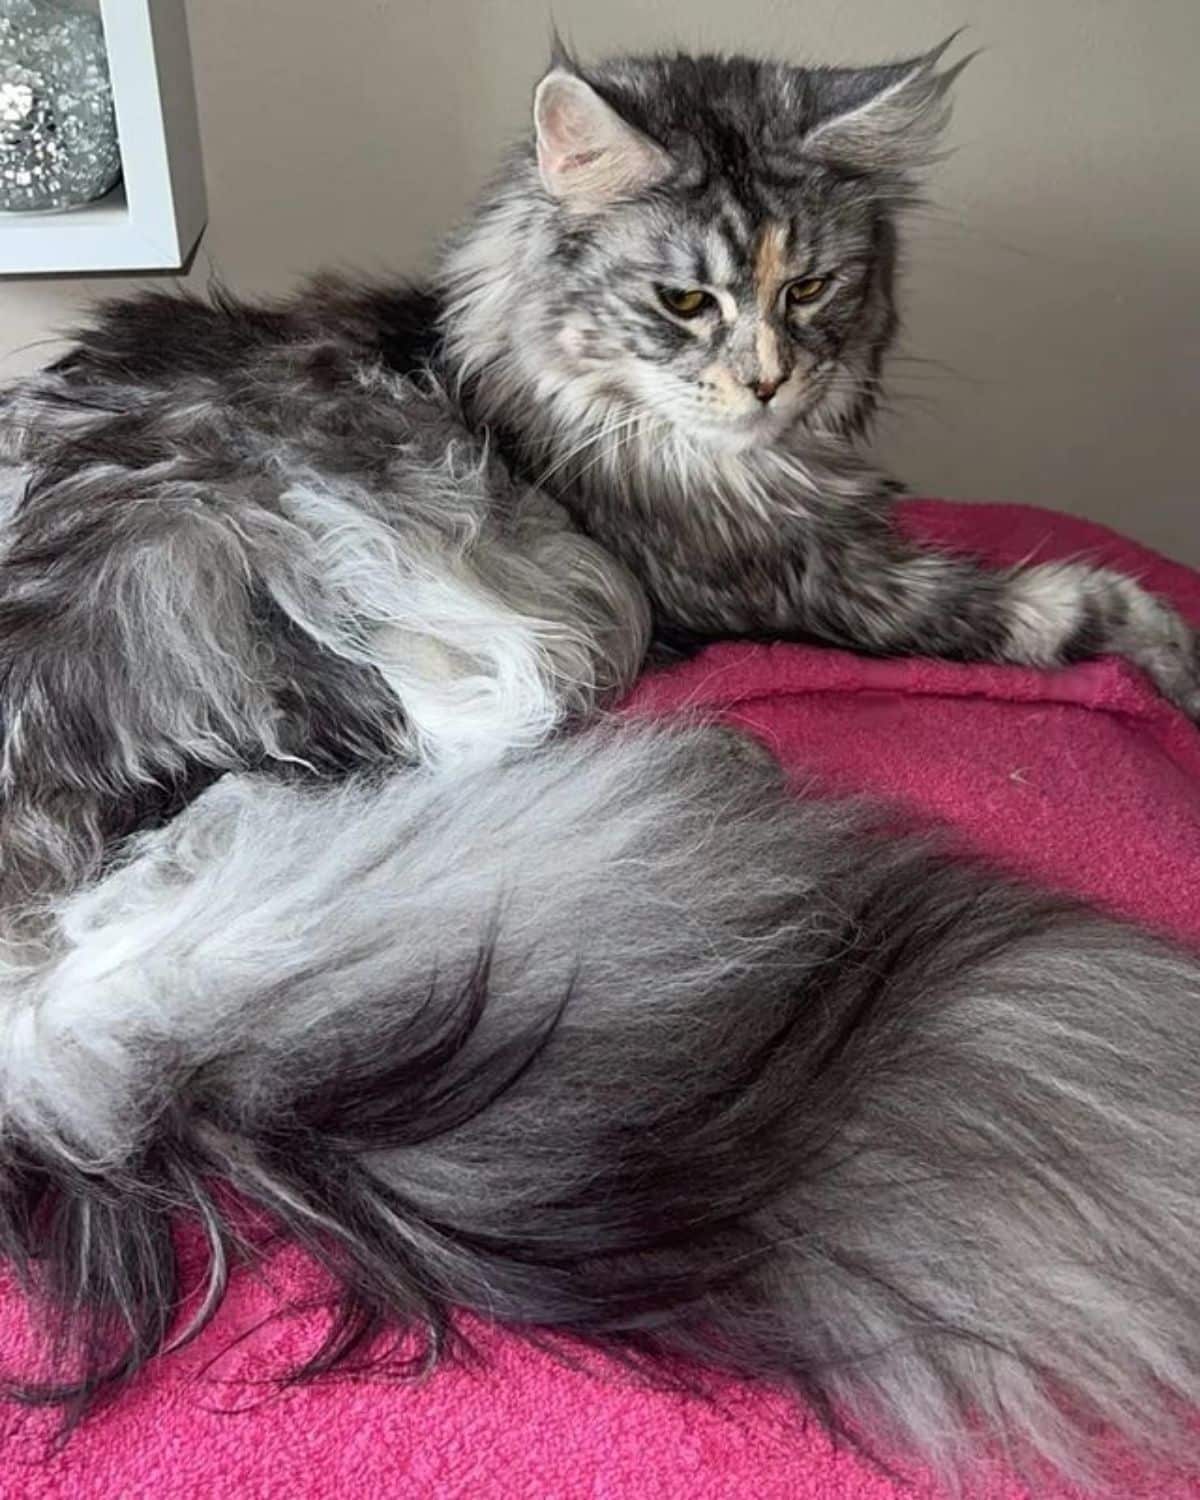 A super fluffy silver maine coon lying on a pink blanket.